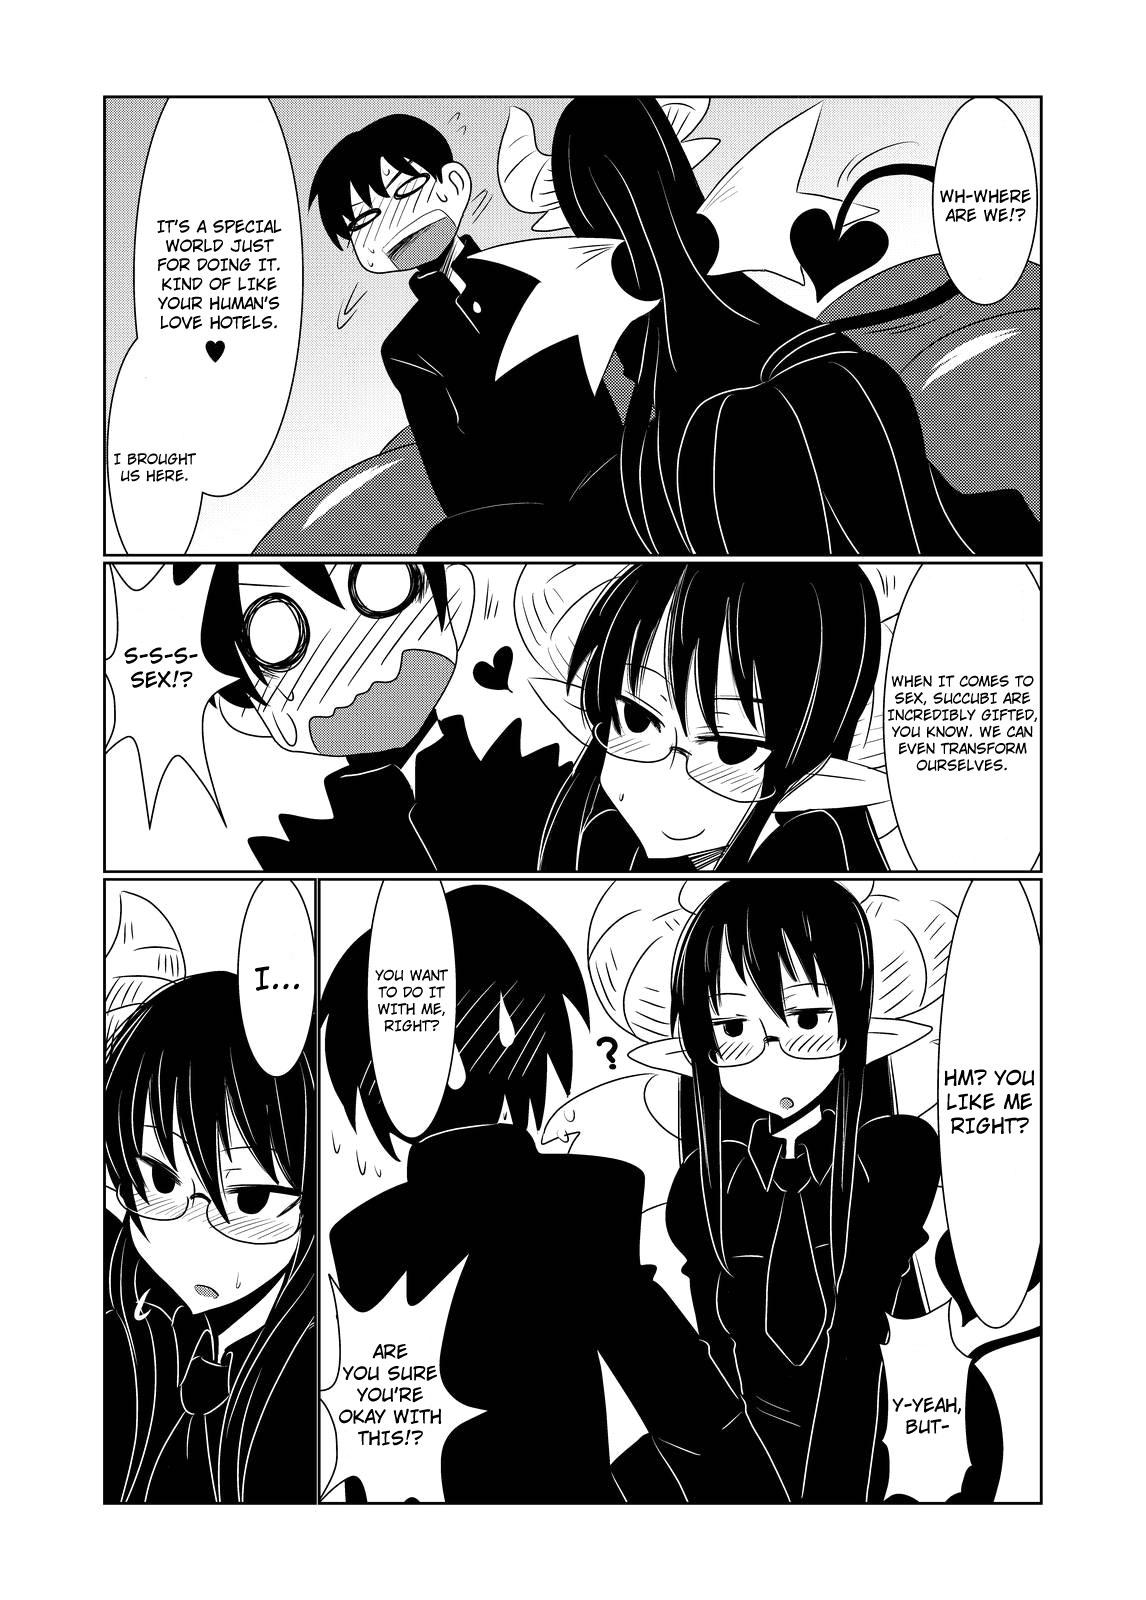 Flagra JK Succubus no Renai Jijou. | Thoughts on Love by a Female High School Succubus Deep Throat - Page 8